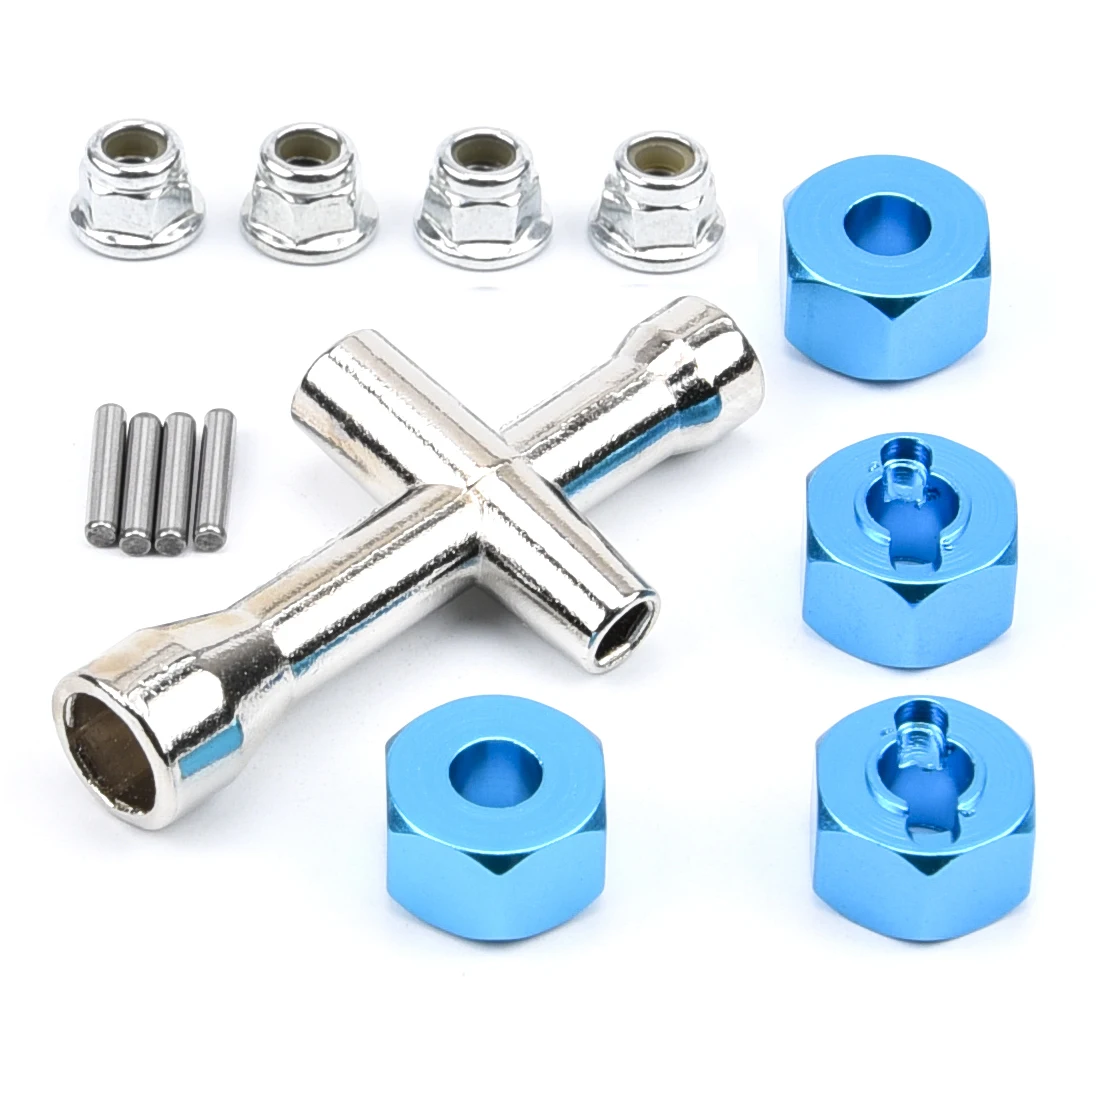 4pcs Aluminum Alloy Wheel Hex Nuts with Pins Drive Hubs 12mm Locknut Adapter RC Car Metal Accessories for 4WD RC Car Blue